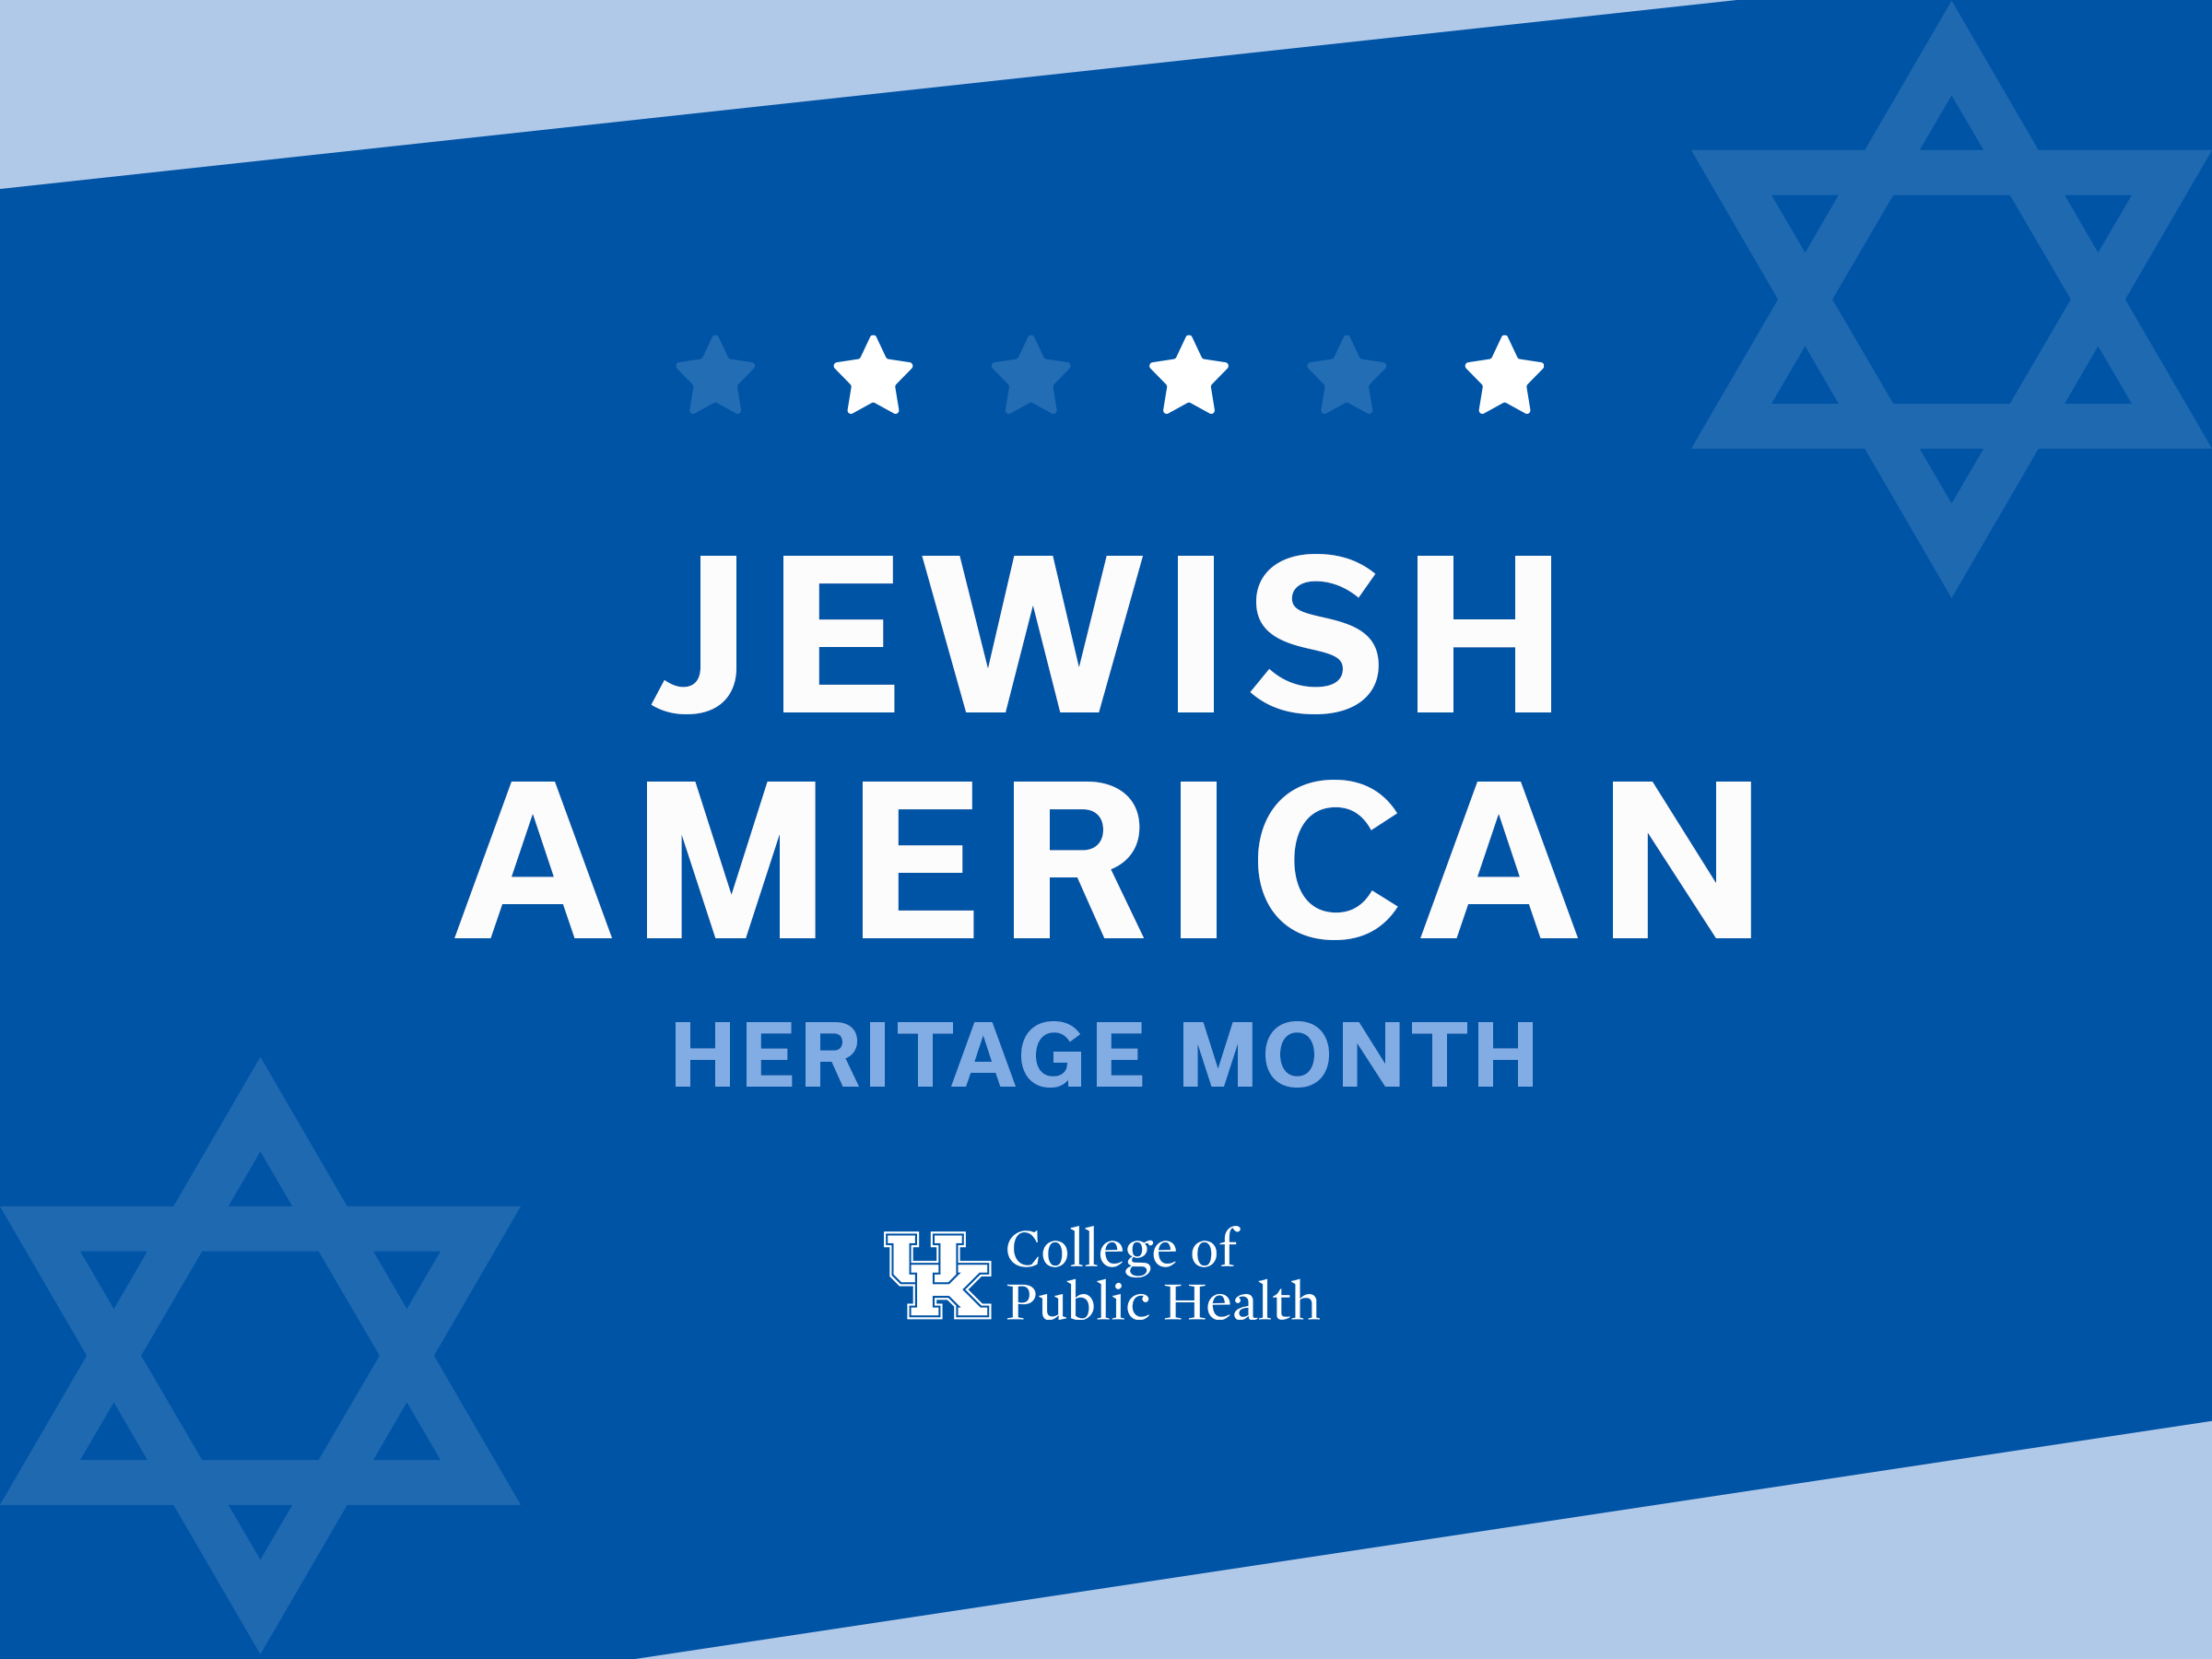 an illustrated promotion for Jewish American Heritage Month